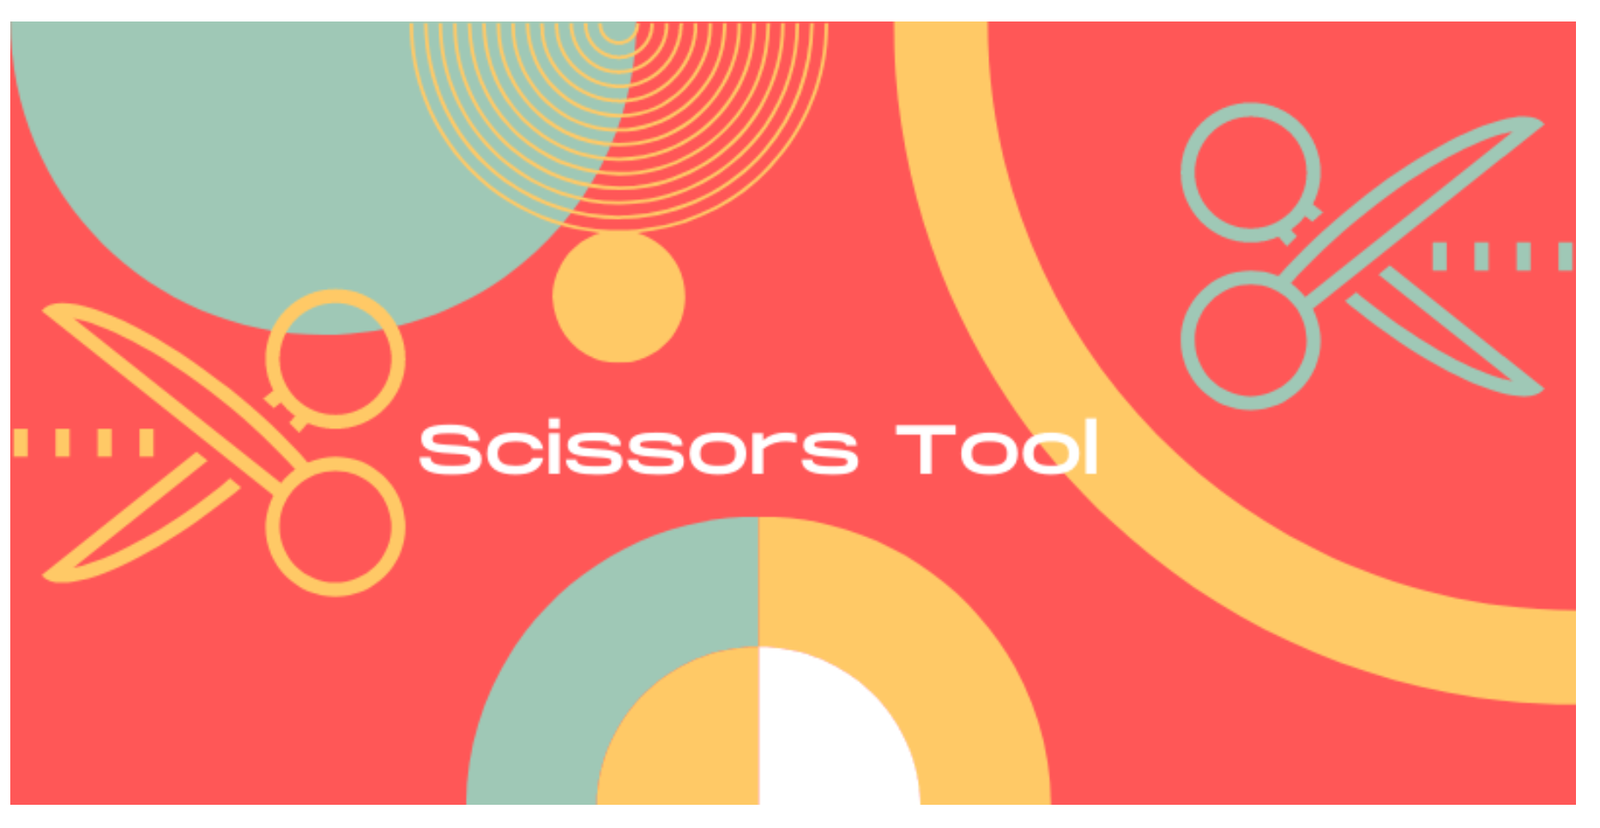 How to Use the Scissors Tool in Adobe Illustrator